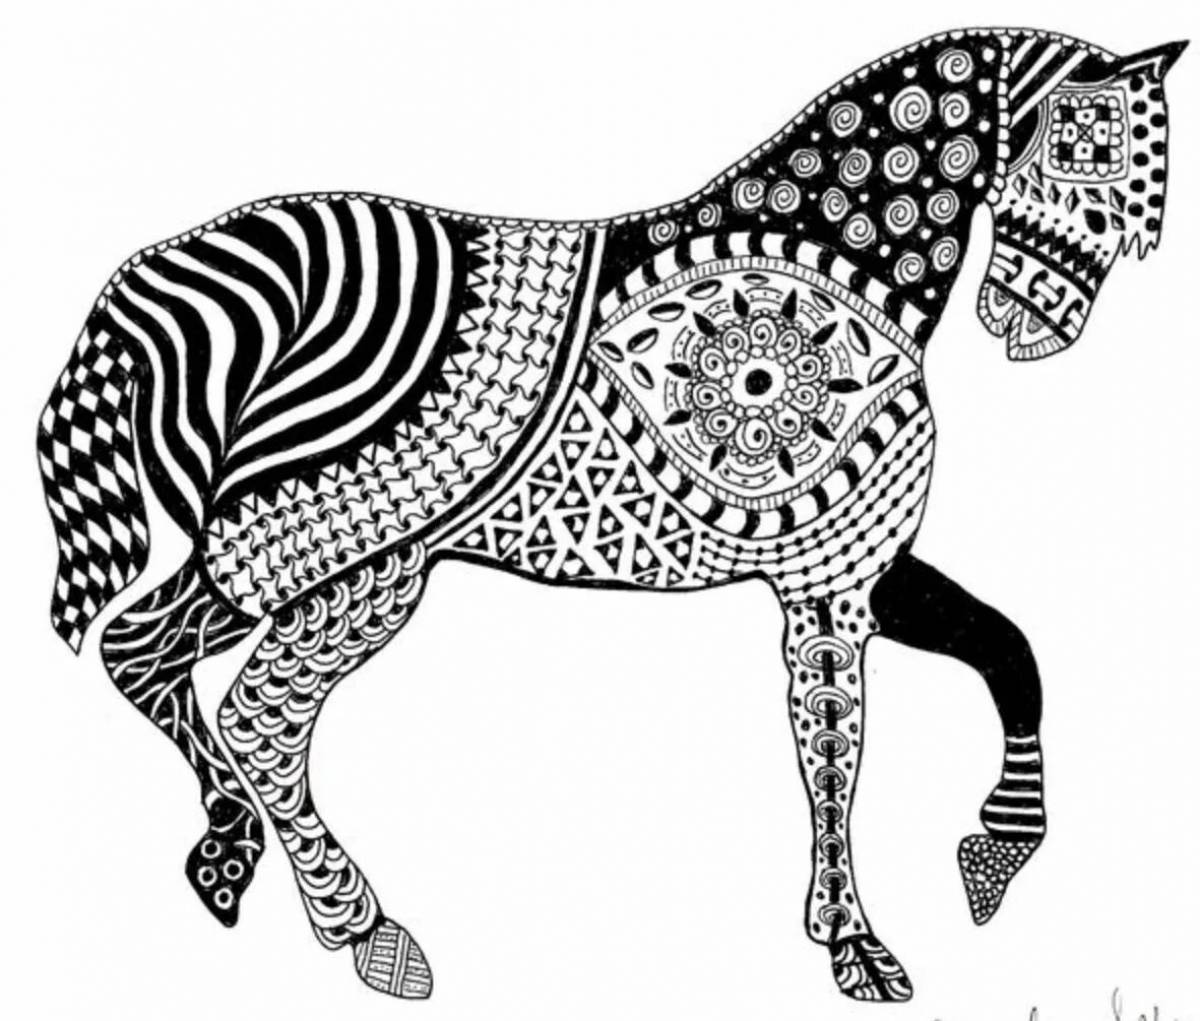 Colorful animal coloring page with pattern